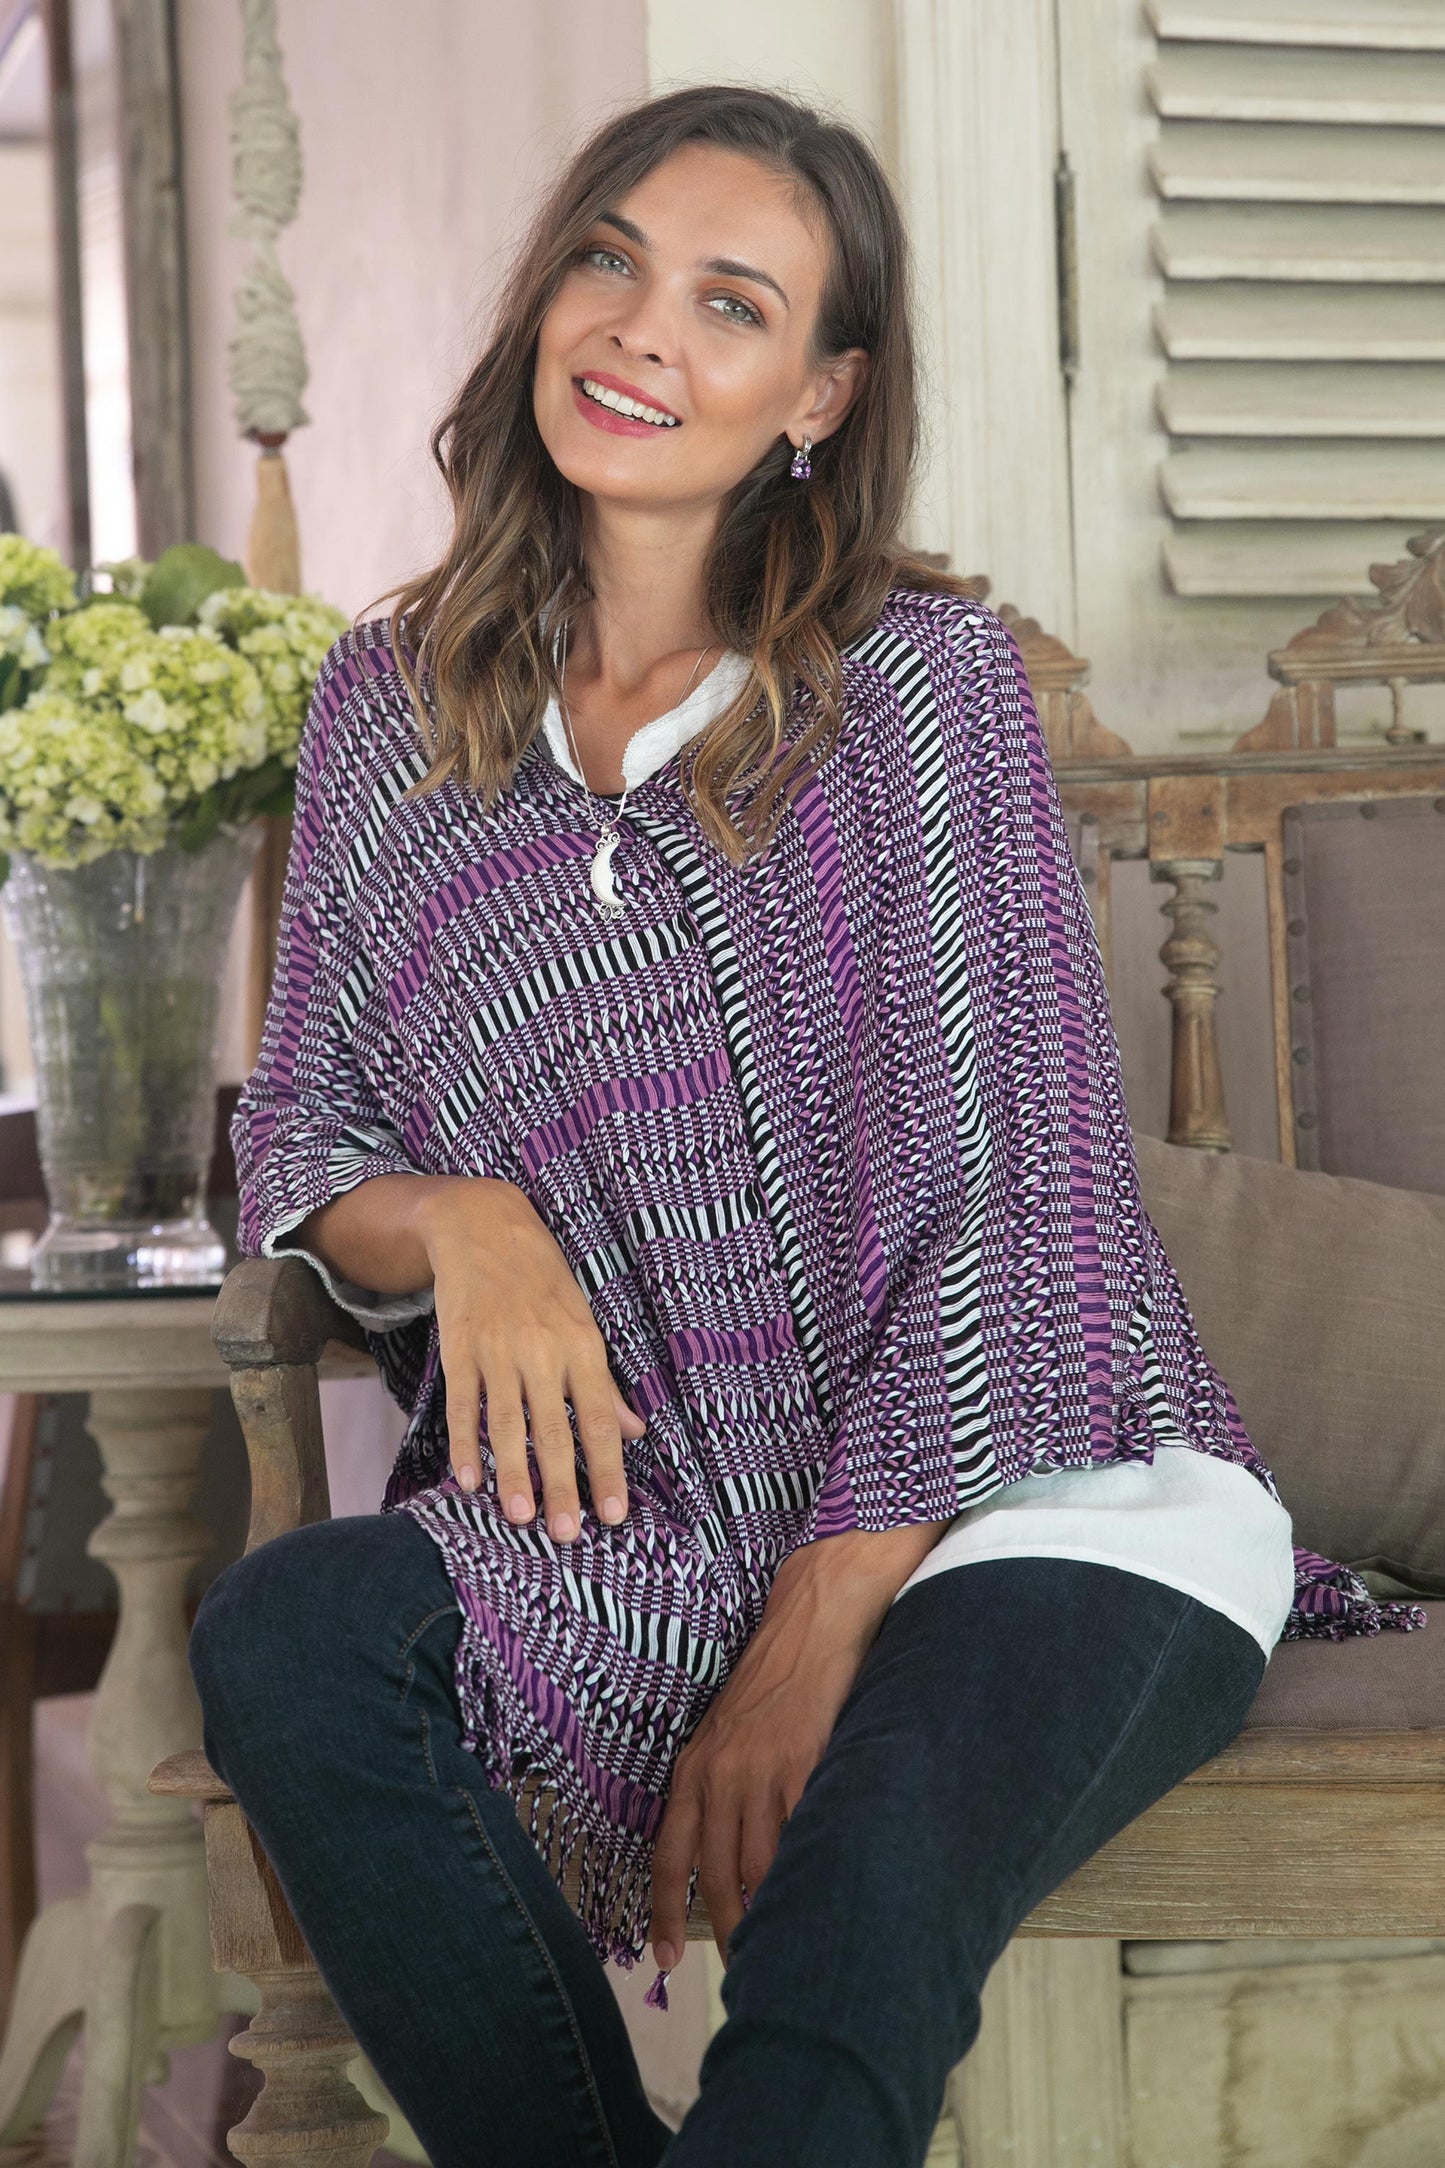 Amethyst Intrigue Guatemalan Handwoven Cotton Poncho in Pink and Purple